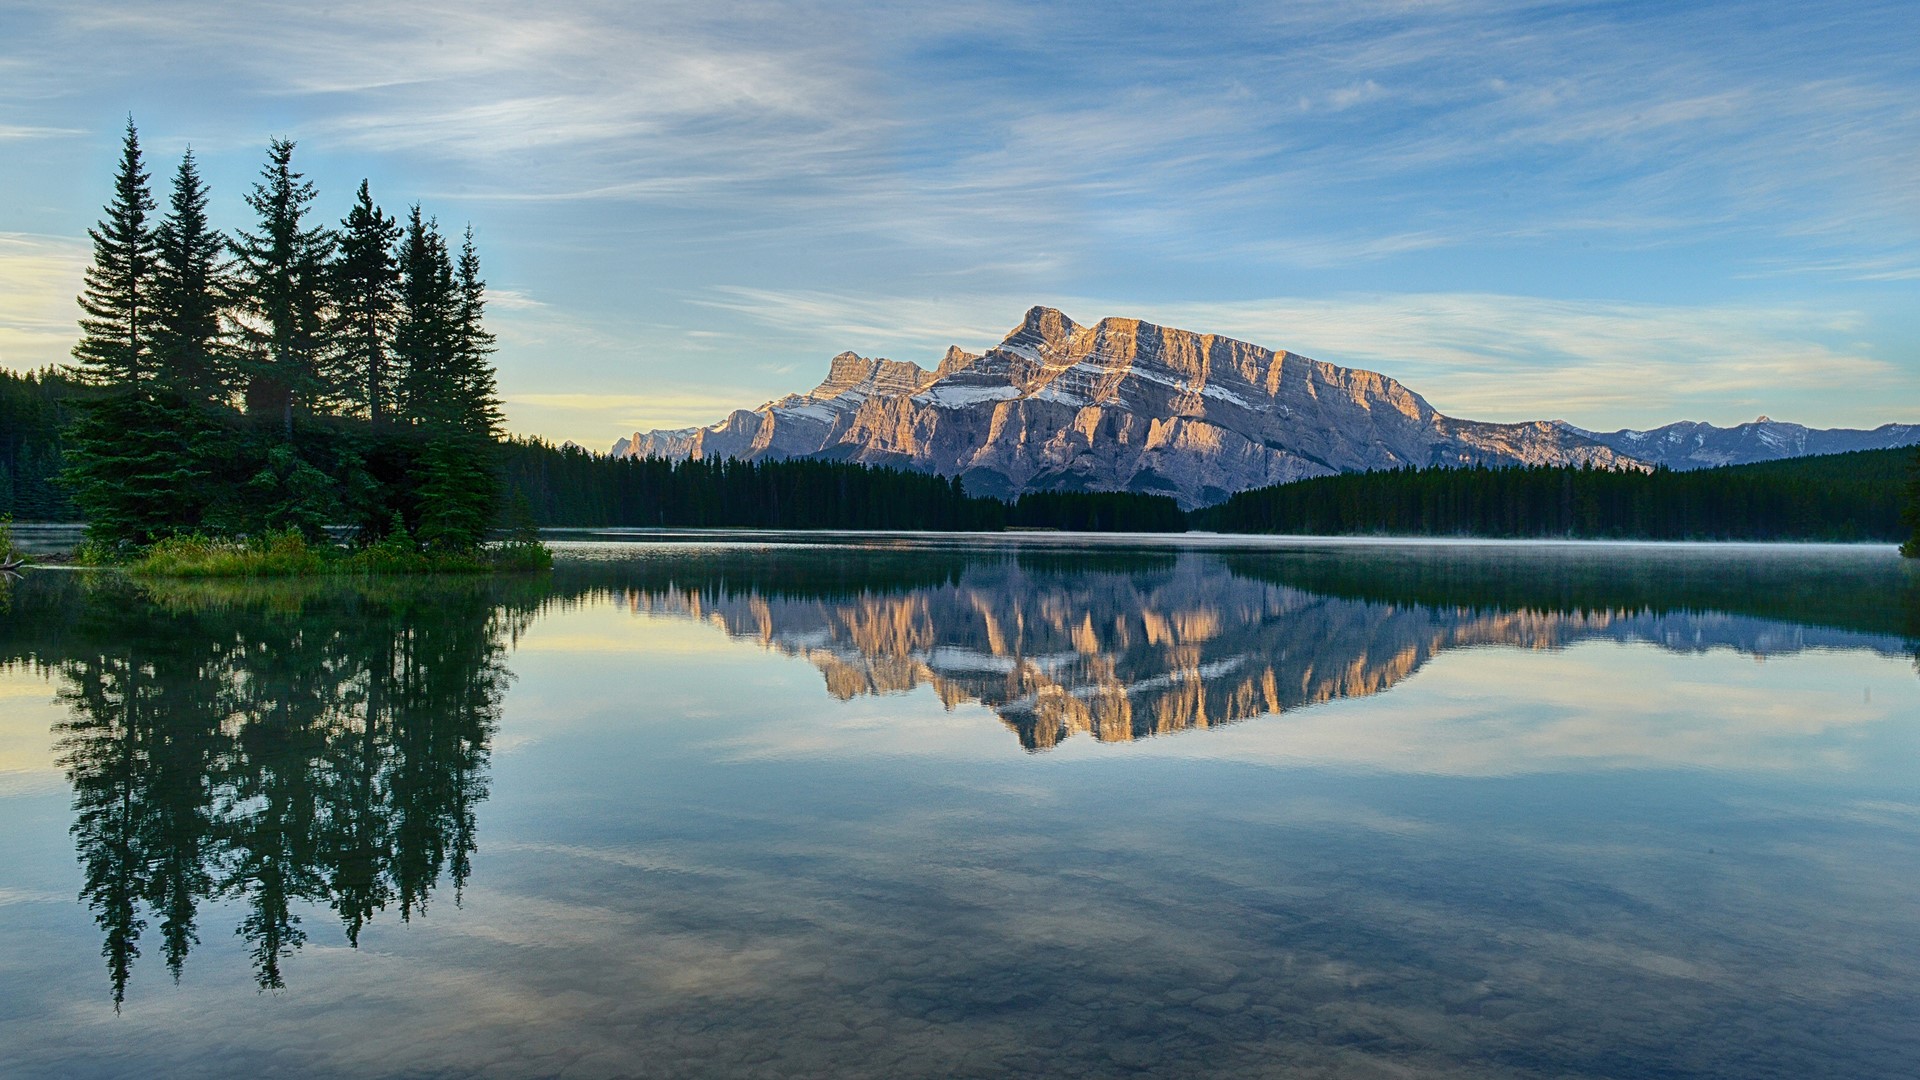 General 1920x1080 nature landscape mountains lake forest reflection clouds water clear water Mount Rundle Alberta Canada Banff National Park Two Jack Lake trees